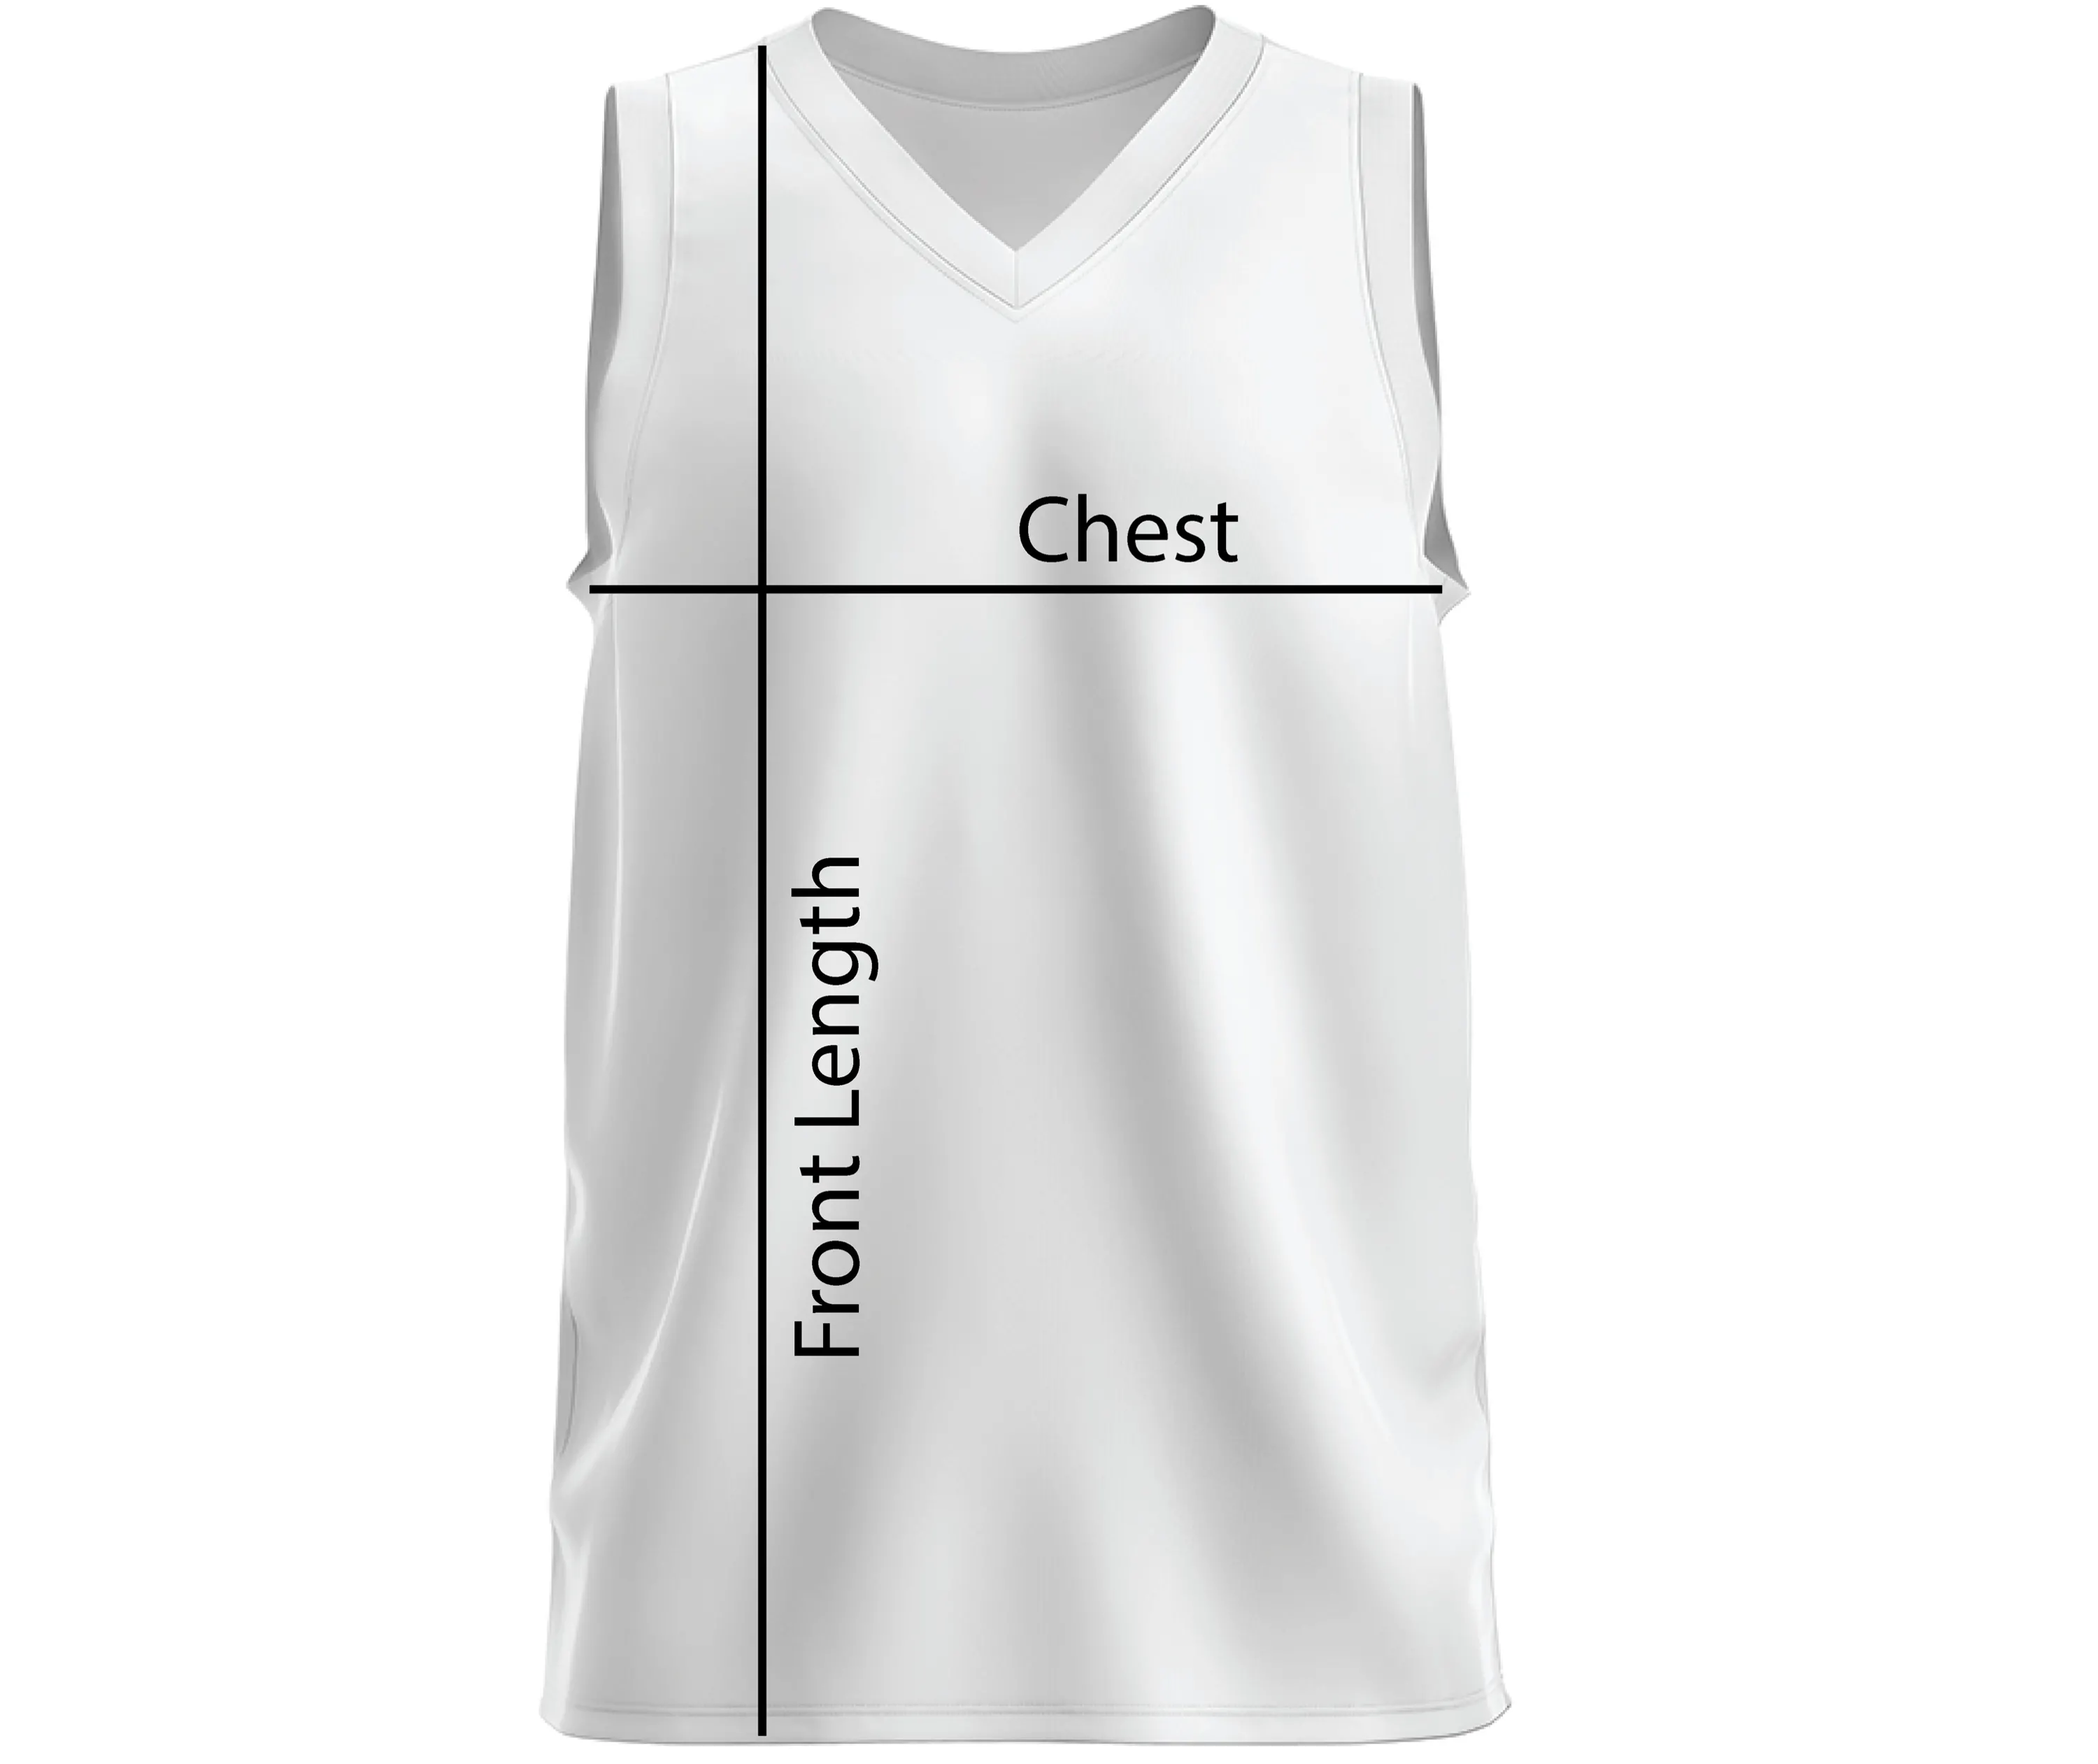 how should a basketball jersey fit